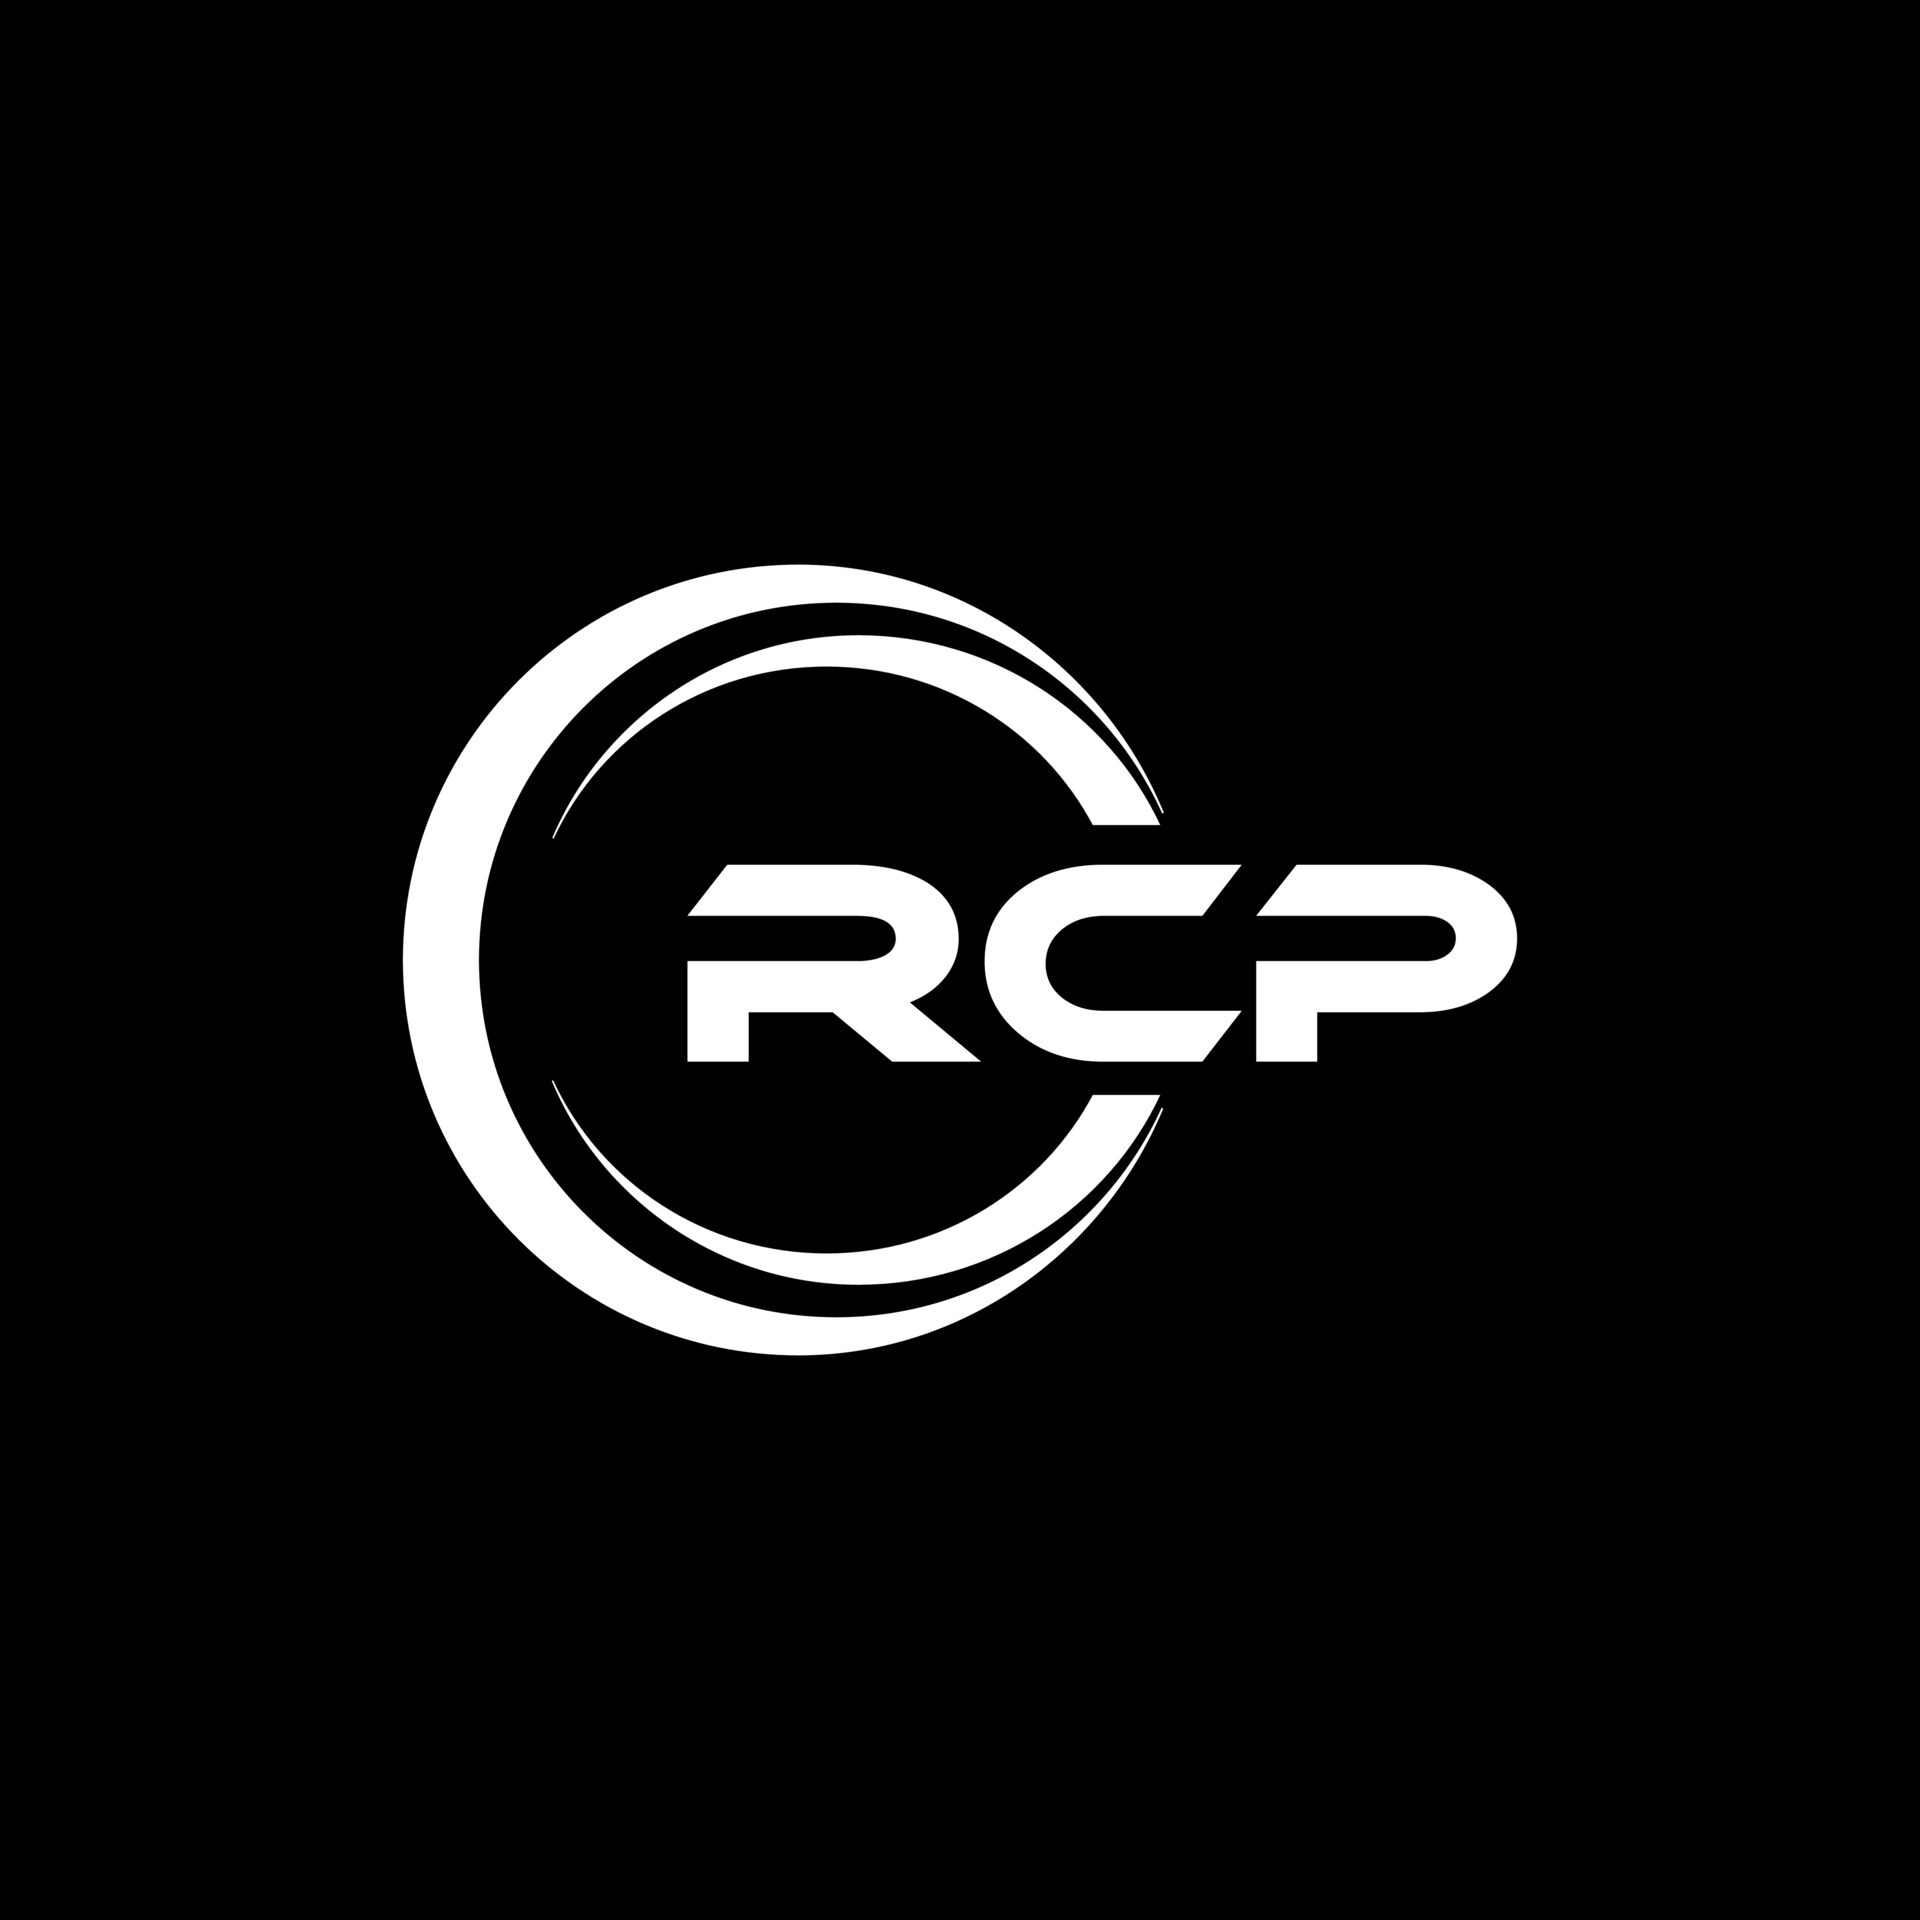 Create the next logo for 'recommended channel partner' and/or 'rcp' | Logo  design contest | 99designs